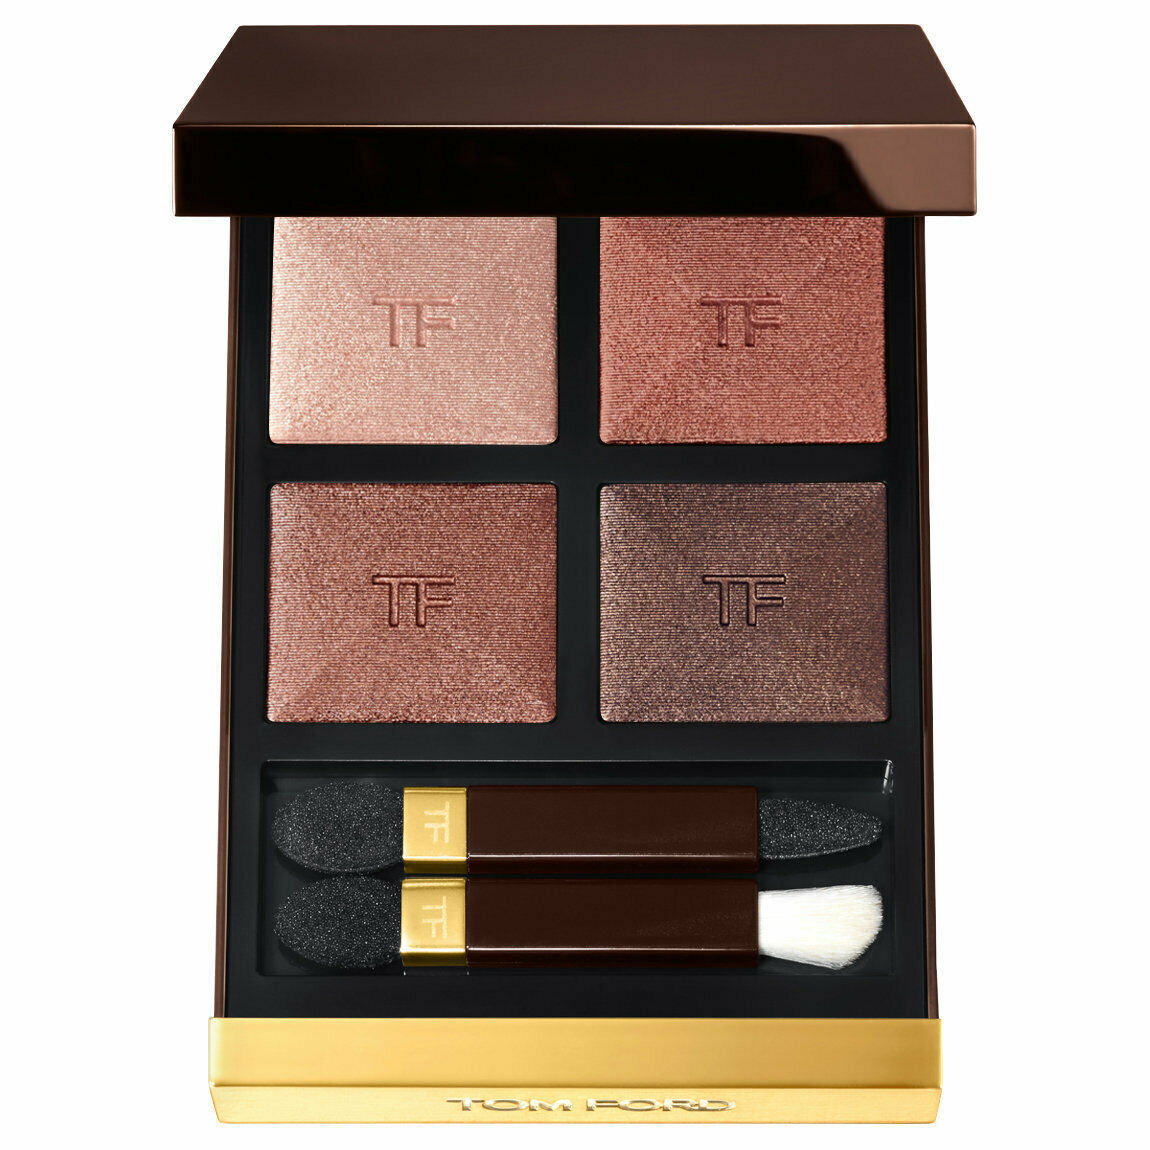 TOM FORD Eye Color Eye Shadow Quad Palette BODY HEAT 03 Peach Taupe Brown BOXED - $59.50